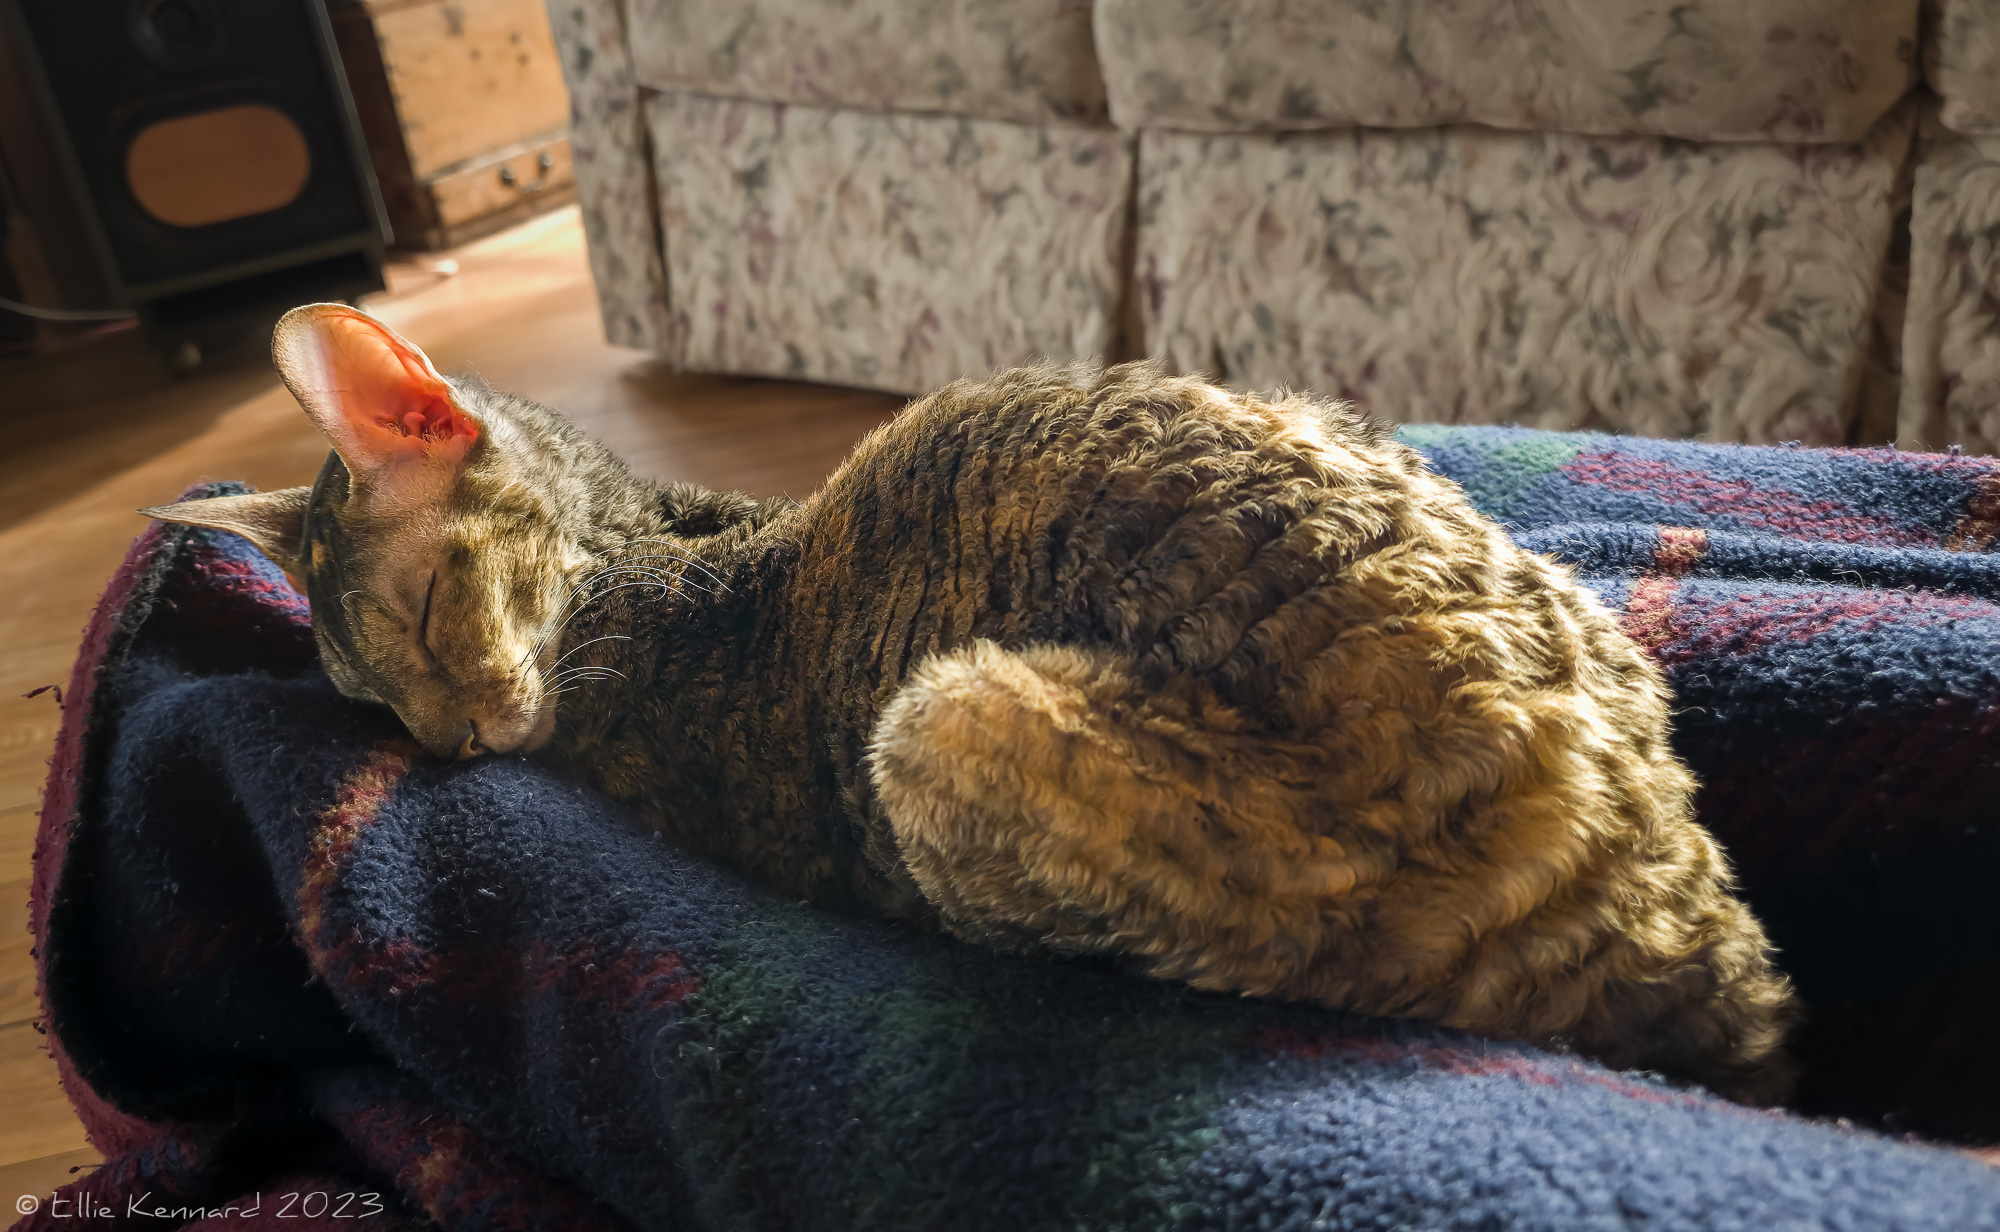 A young curly coated tabby cat is lying asleep on a blanket. She is lying in a hollow, between two legs covered with the blanket, and her head is turned towards us. Her coat is variously golden, brown, black and cream..